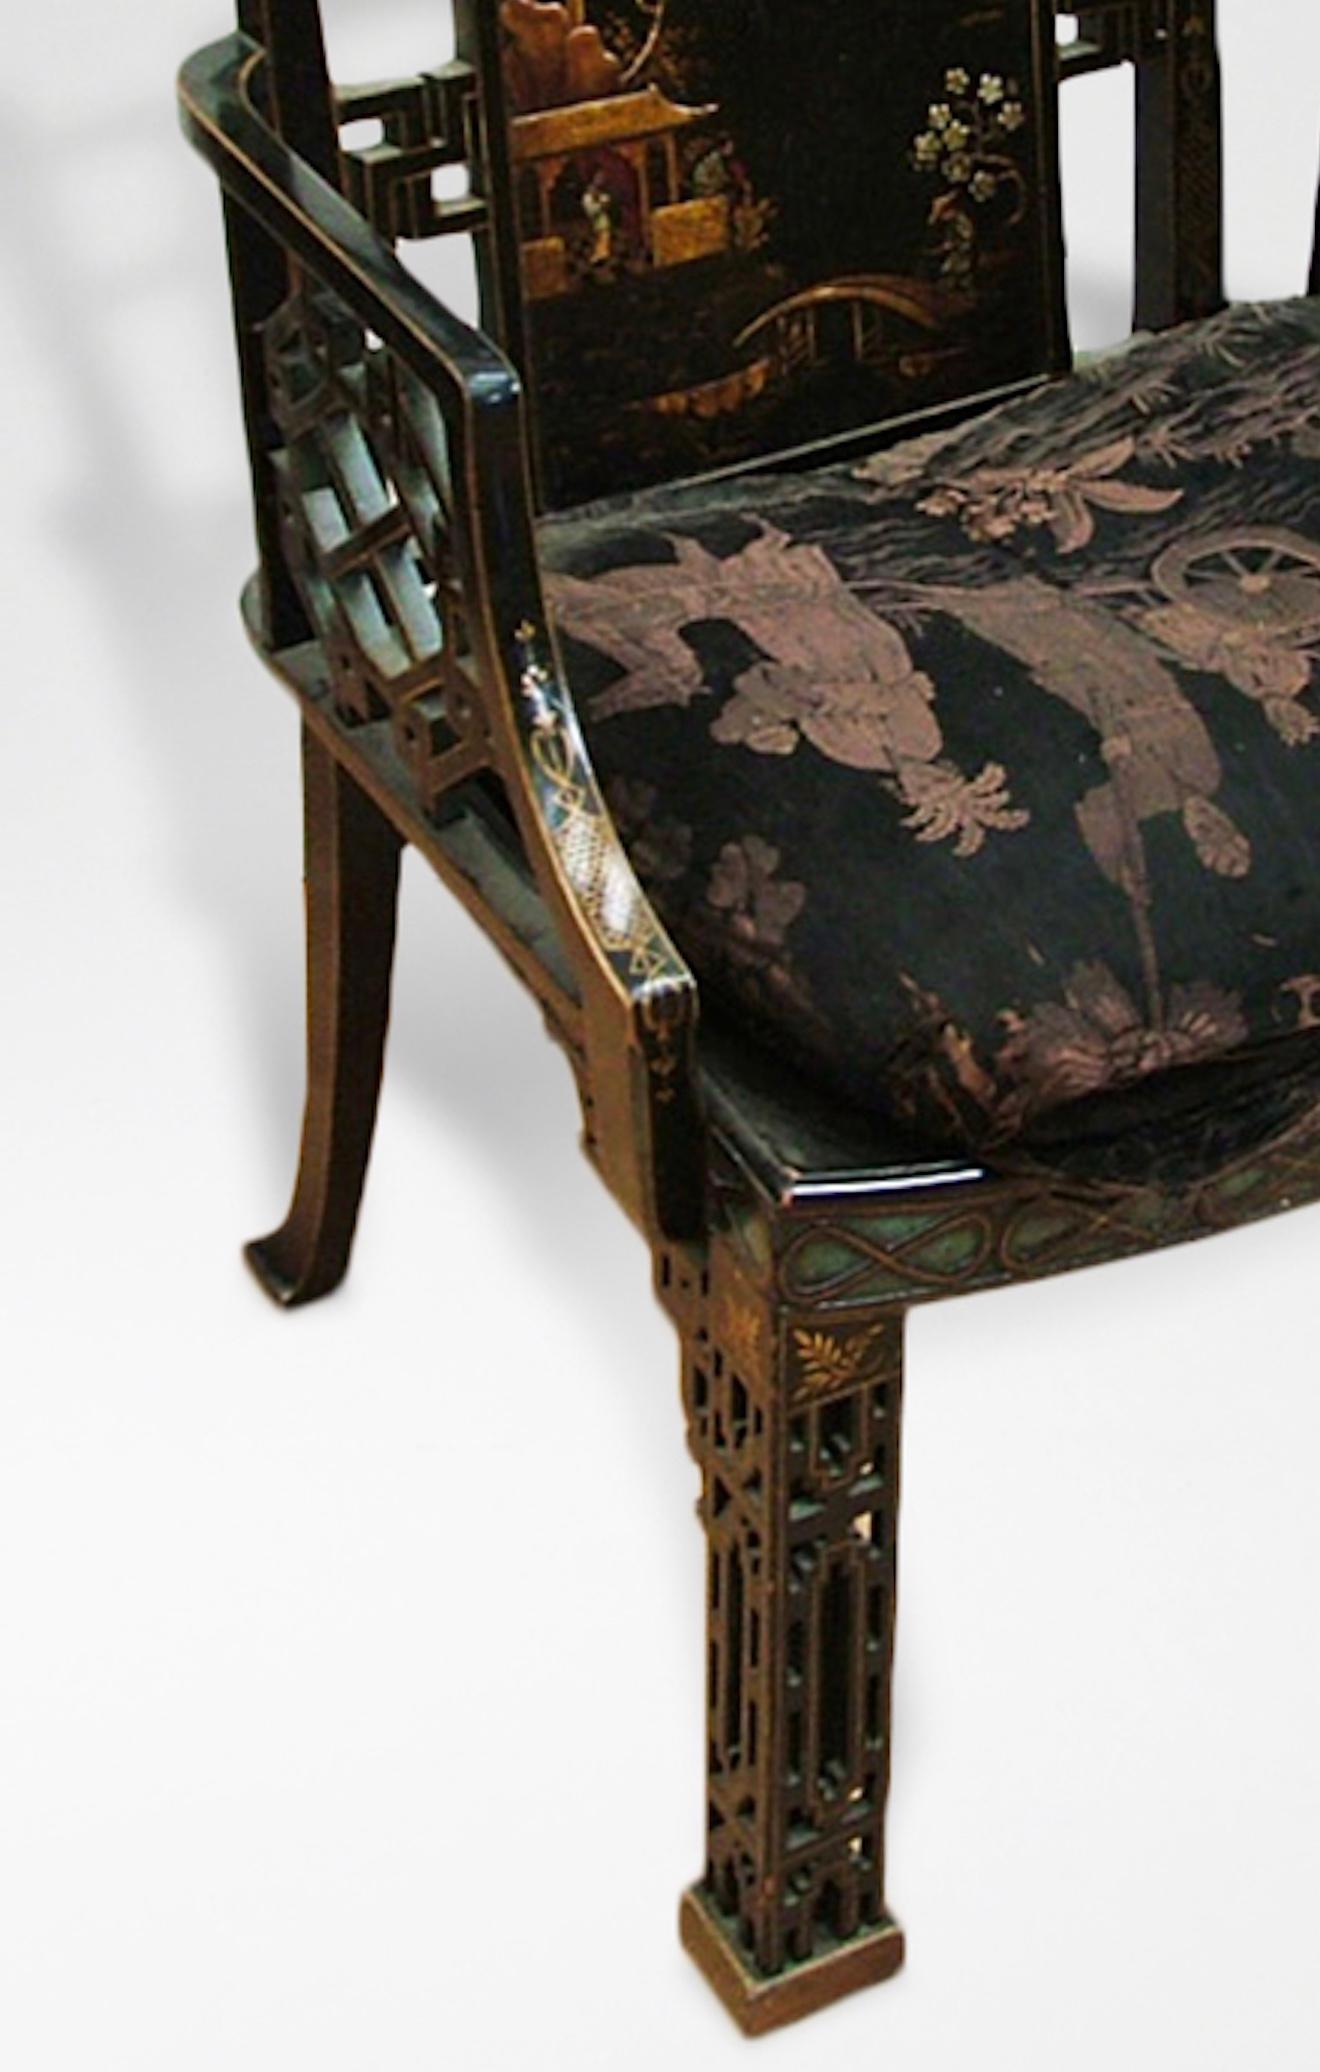 20th Century English Black Lacquer Pagoda Armchair in the Chinese Chippendale Style For Sale